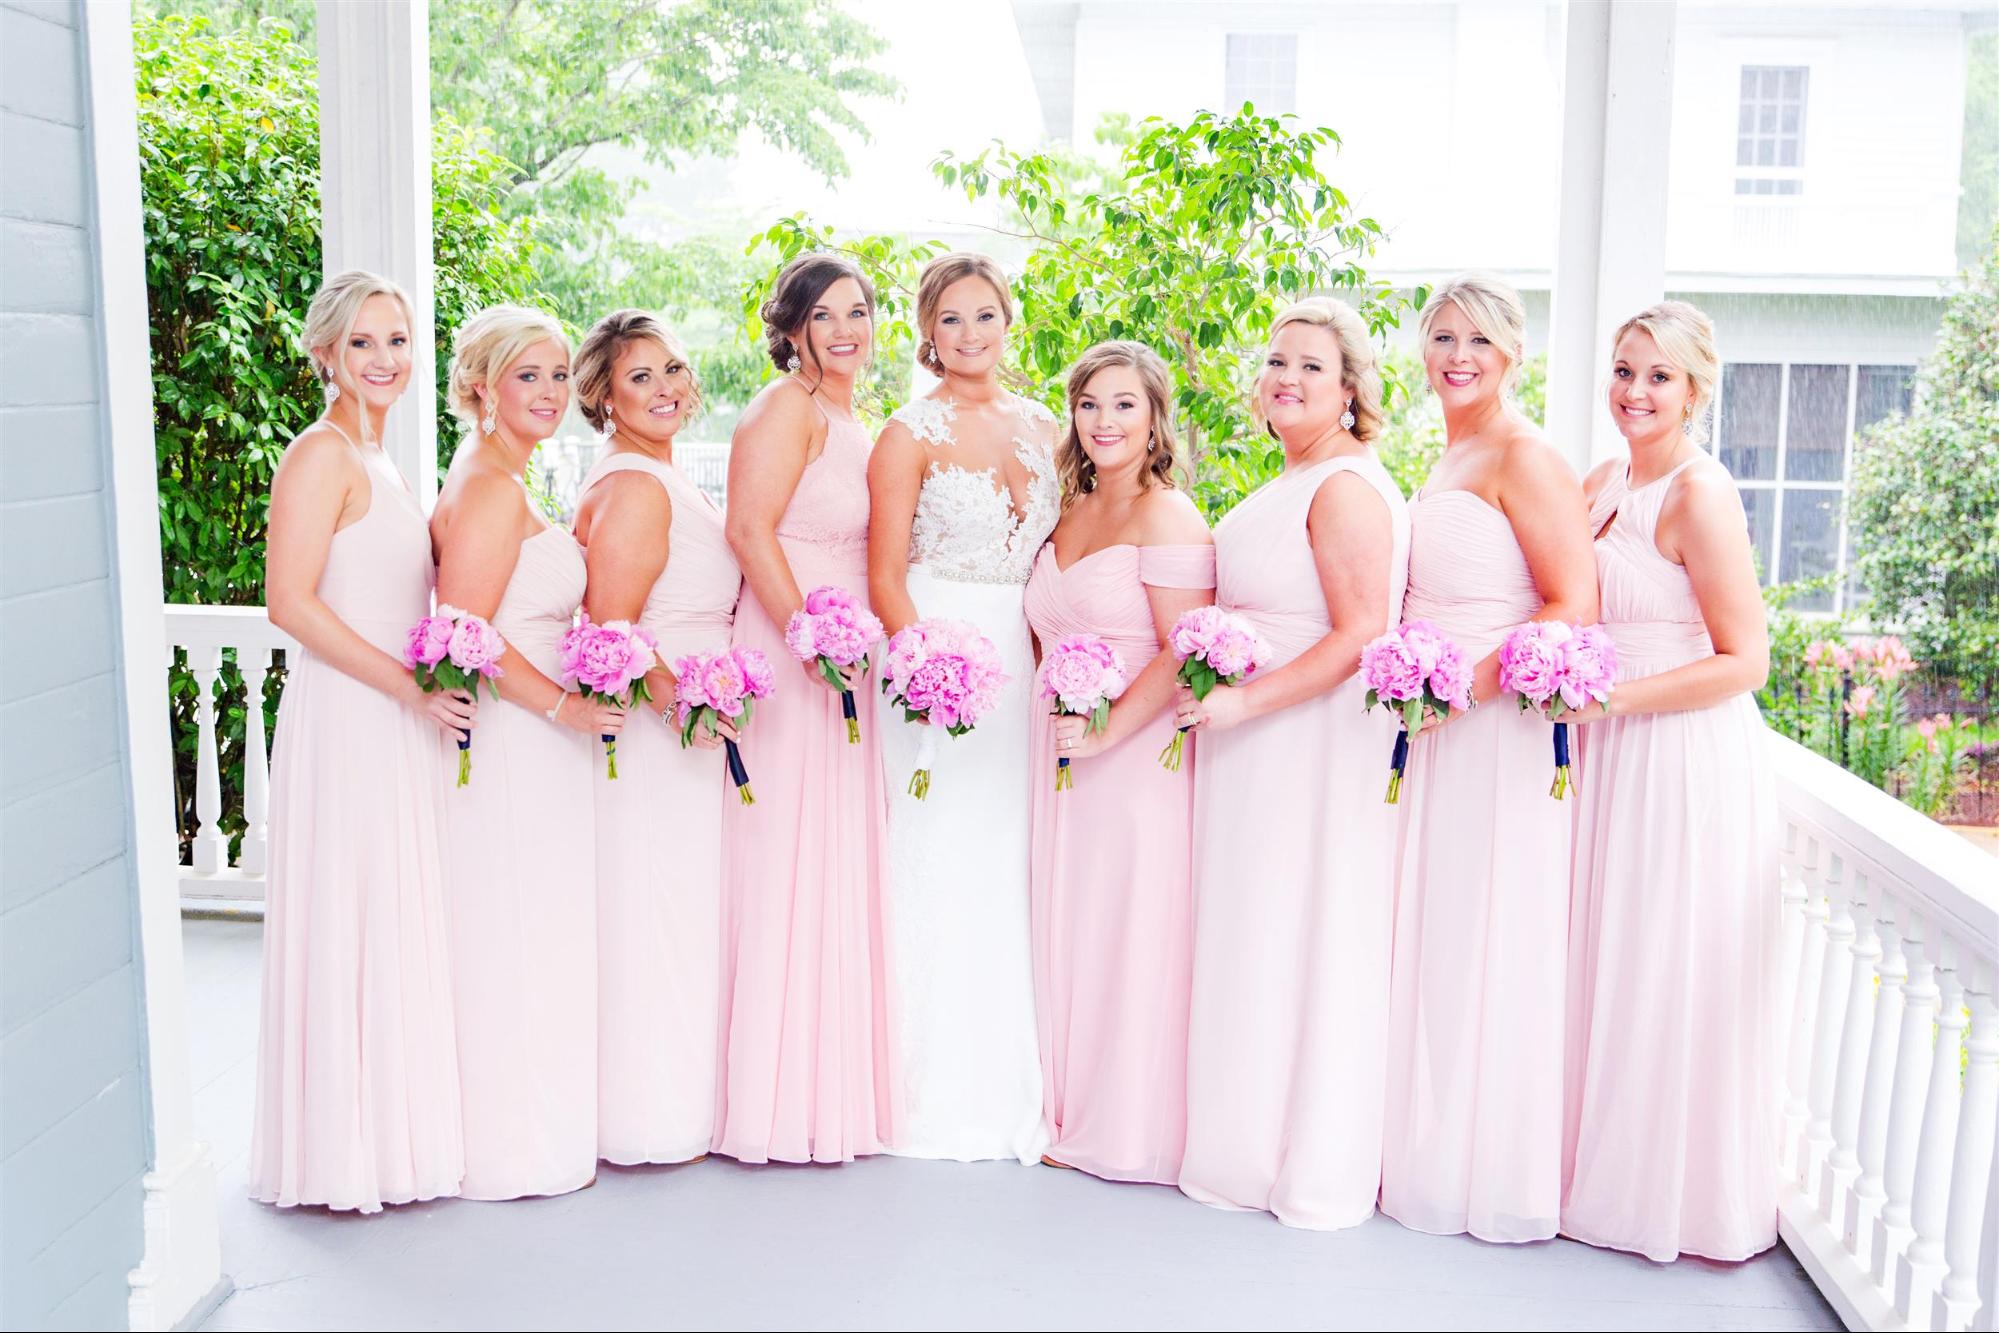 Rewear Your Bridesmaid Dresses - Mix and Match Bridal Party